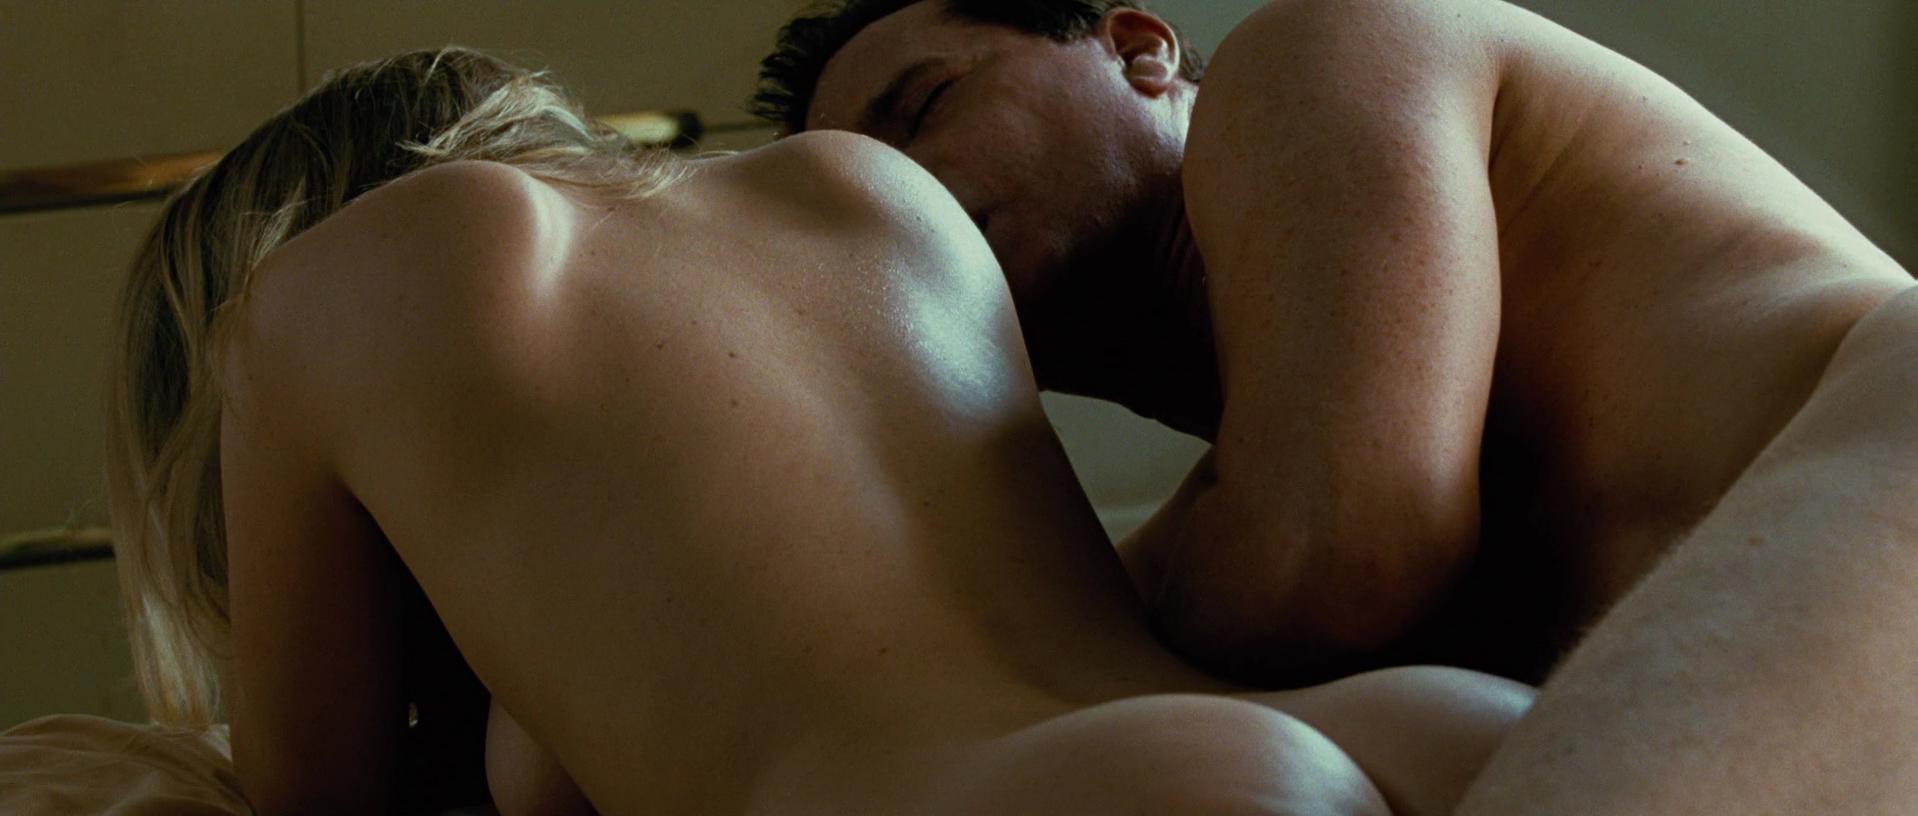 Free preview of alice eve naked in stolen